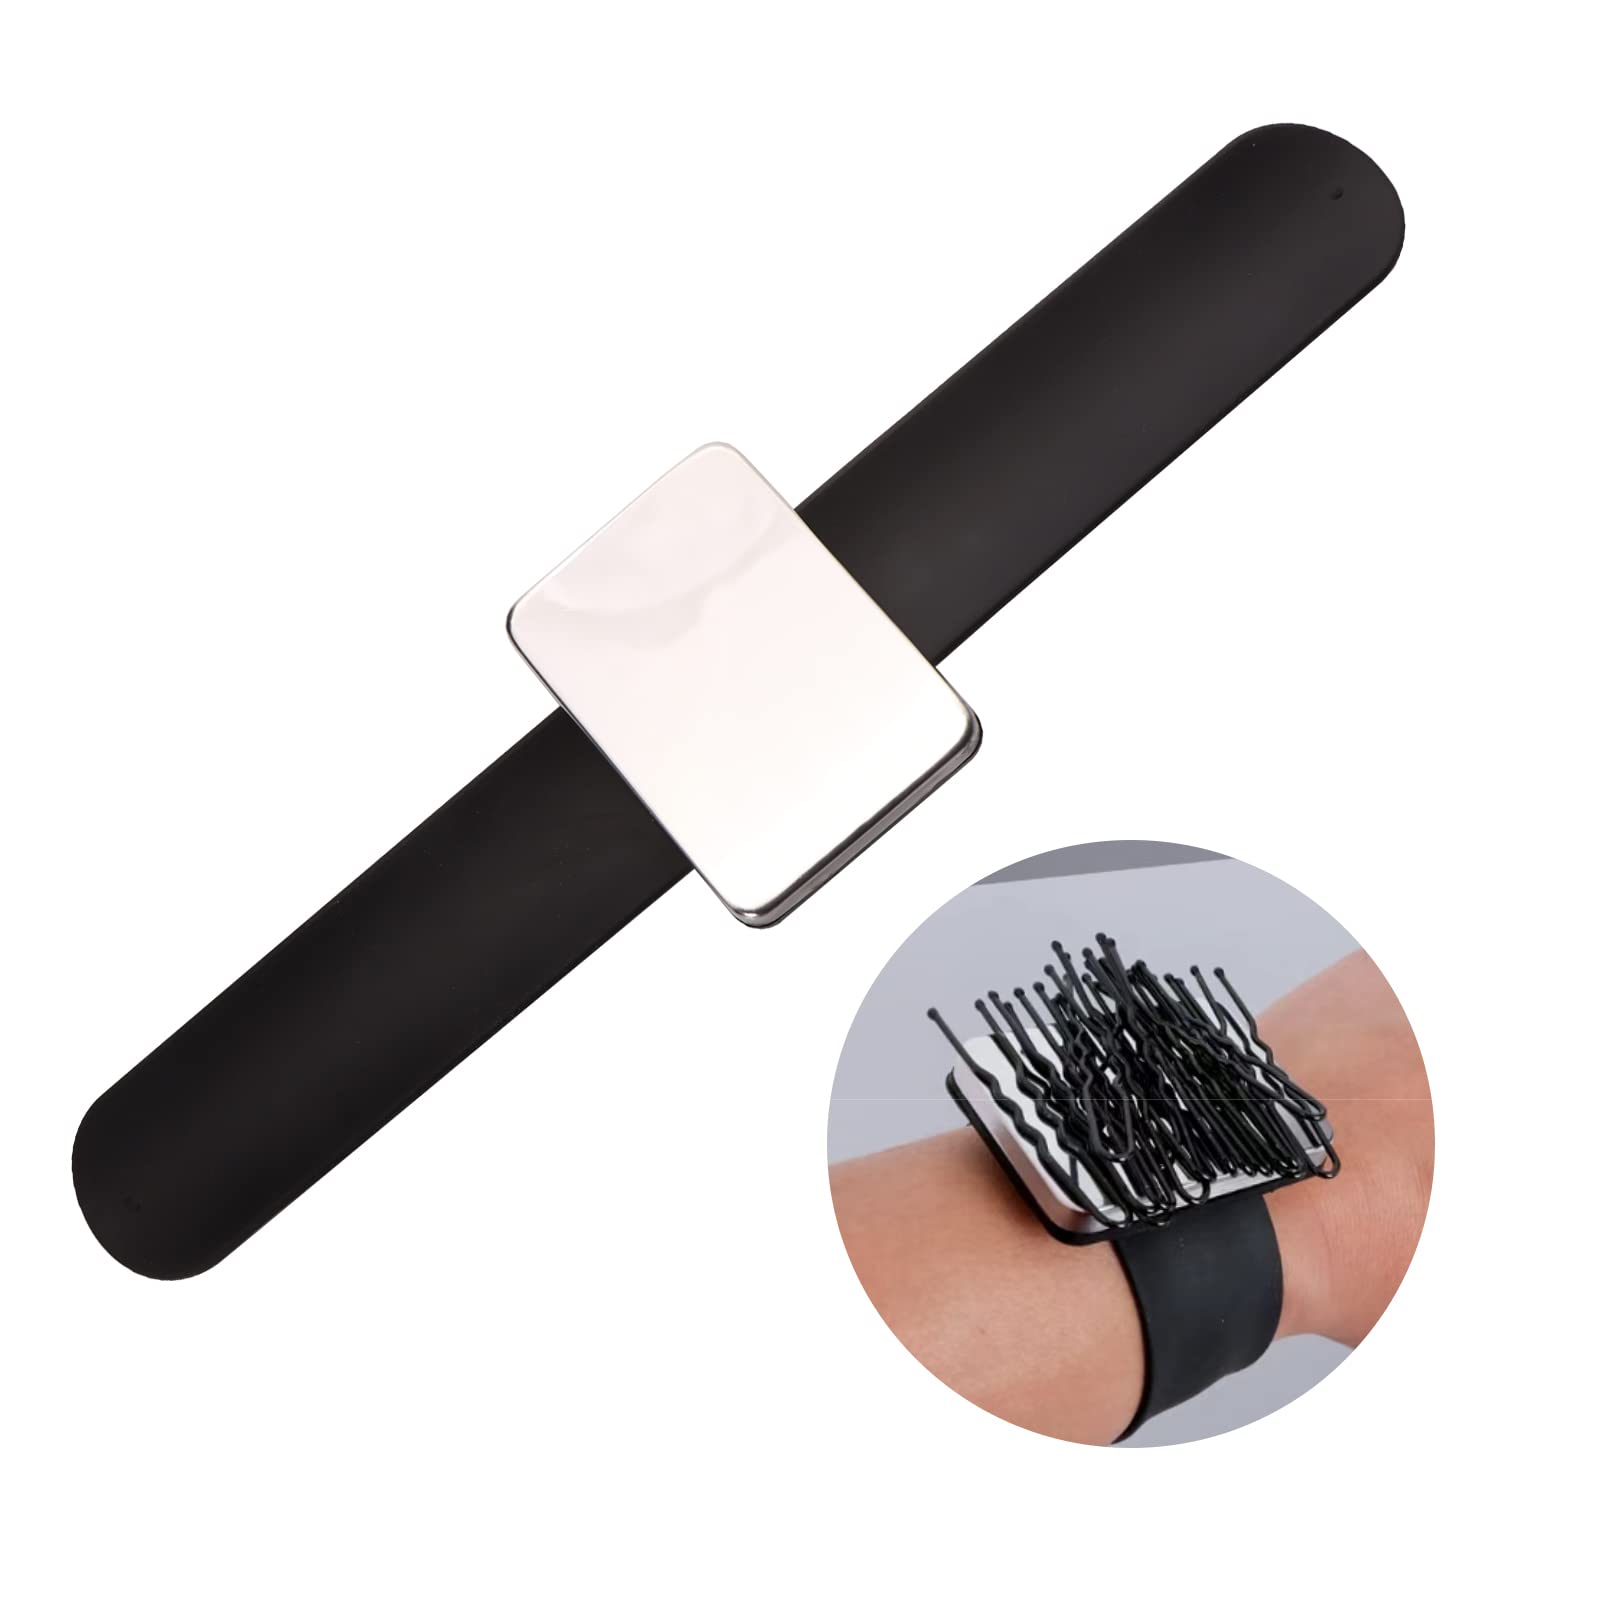 Magnetic Bobby Pin Holder - Hold Metal Bobby Pins and Clips in